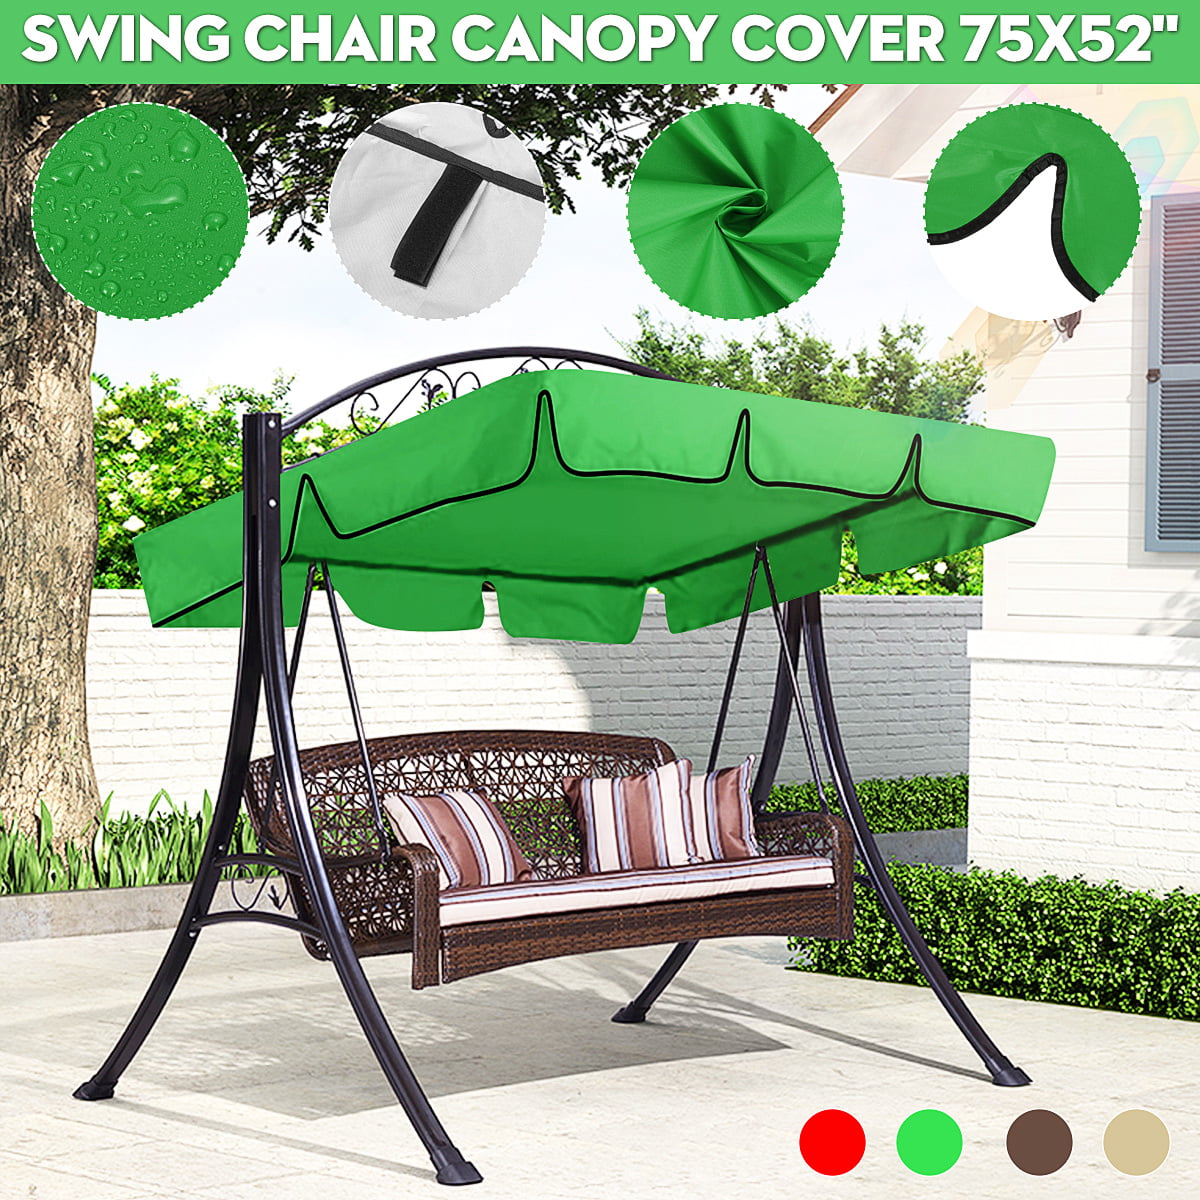 2 & 3 Seater Garden Swing Chair Replacement Patio Canopy Spare Fabric Cover ！ 